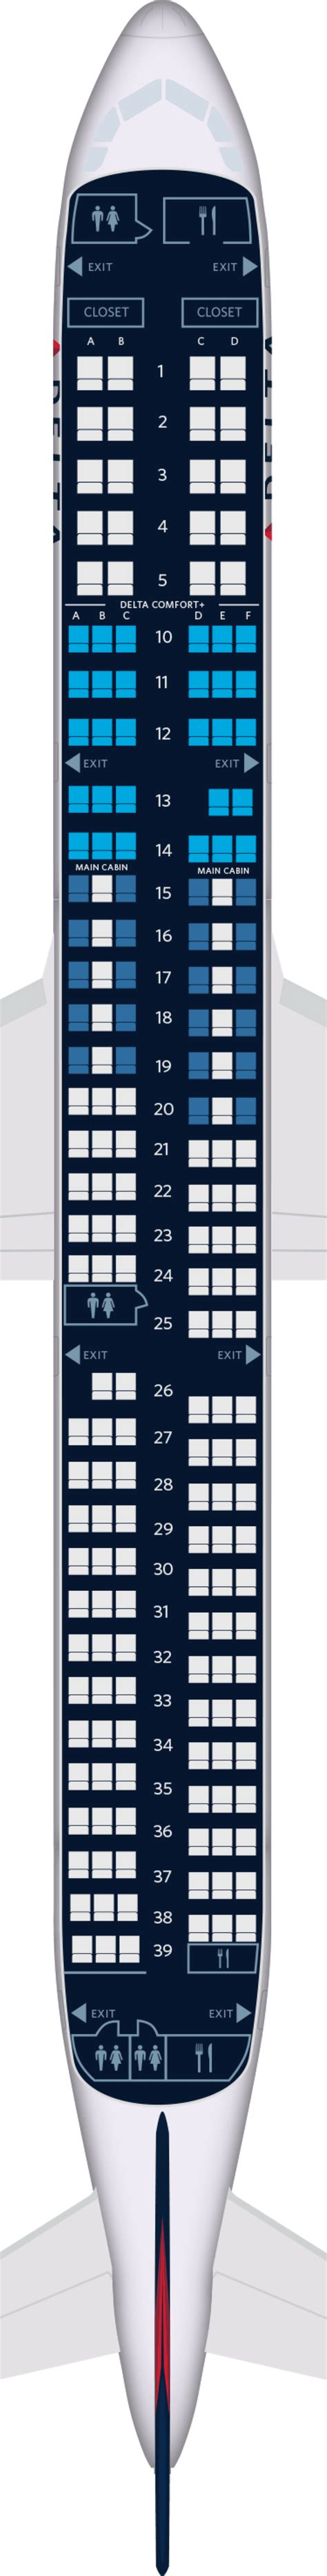 Delta Airbus A321 Seat Map World Map